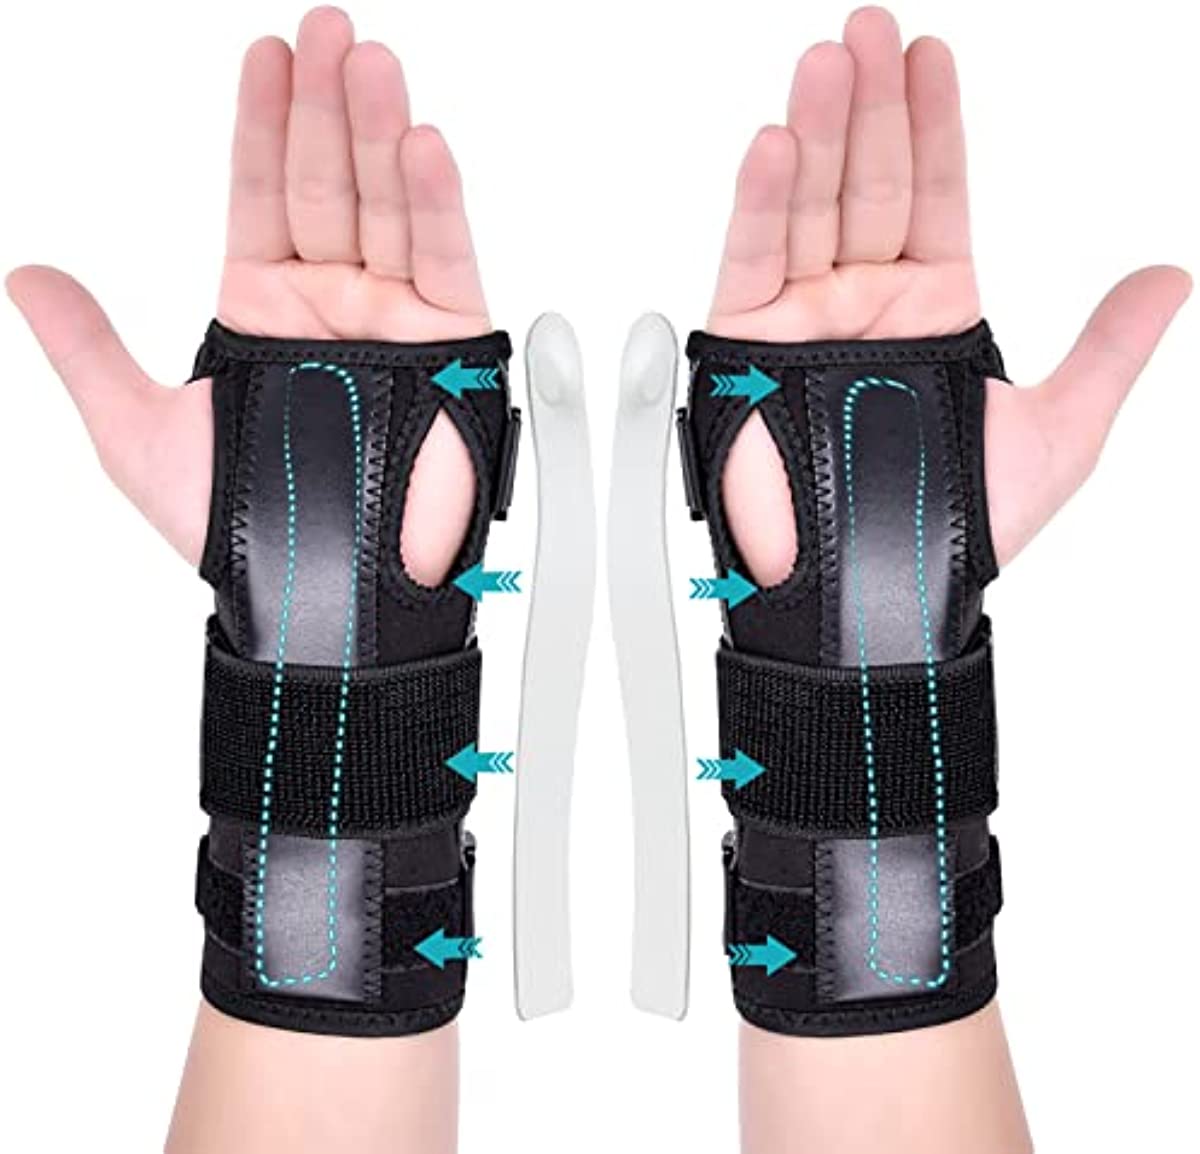 Wrist Splint for Carpal-Tunnel Syndrome by PKSTONE, Adjustable Compression Wrist Brace for Right and Left Hand, Pain Relief for Arthritis, Tendonitis, Sprains